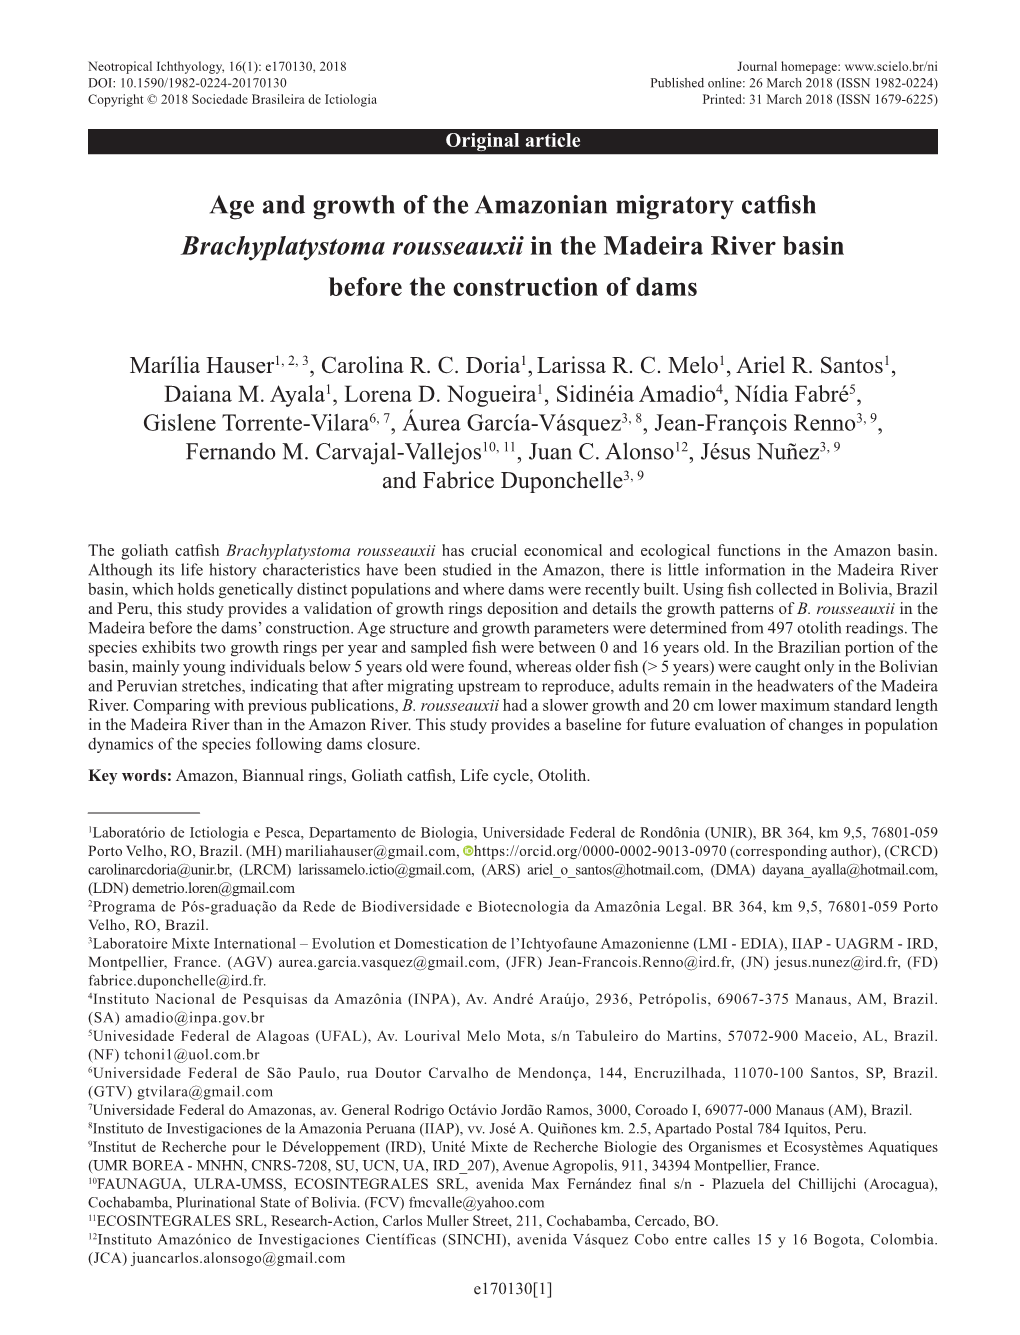 Age and Growth of the Amazonian Migratory Catfish Brachyplatystoma Rousseauxii in the Madeira River Basin Before the Construction of Dams